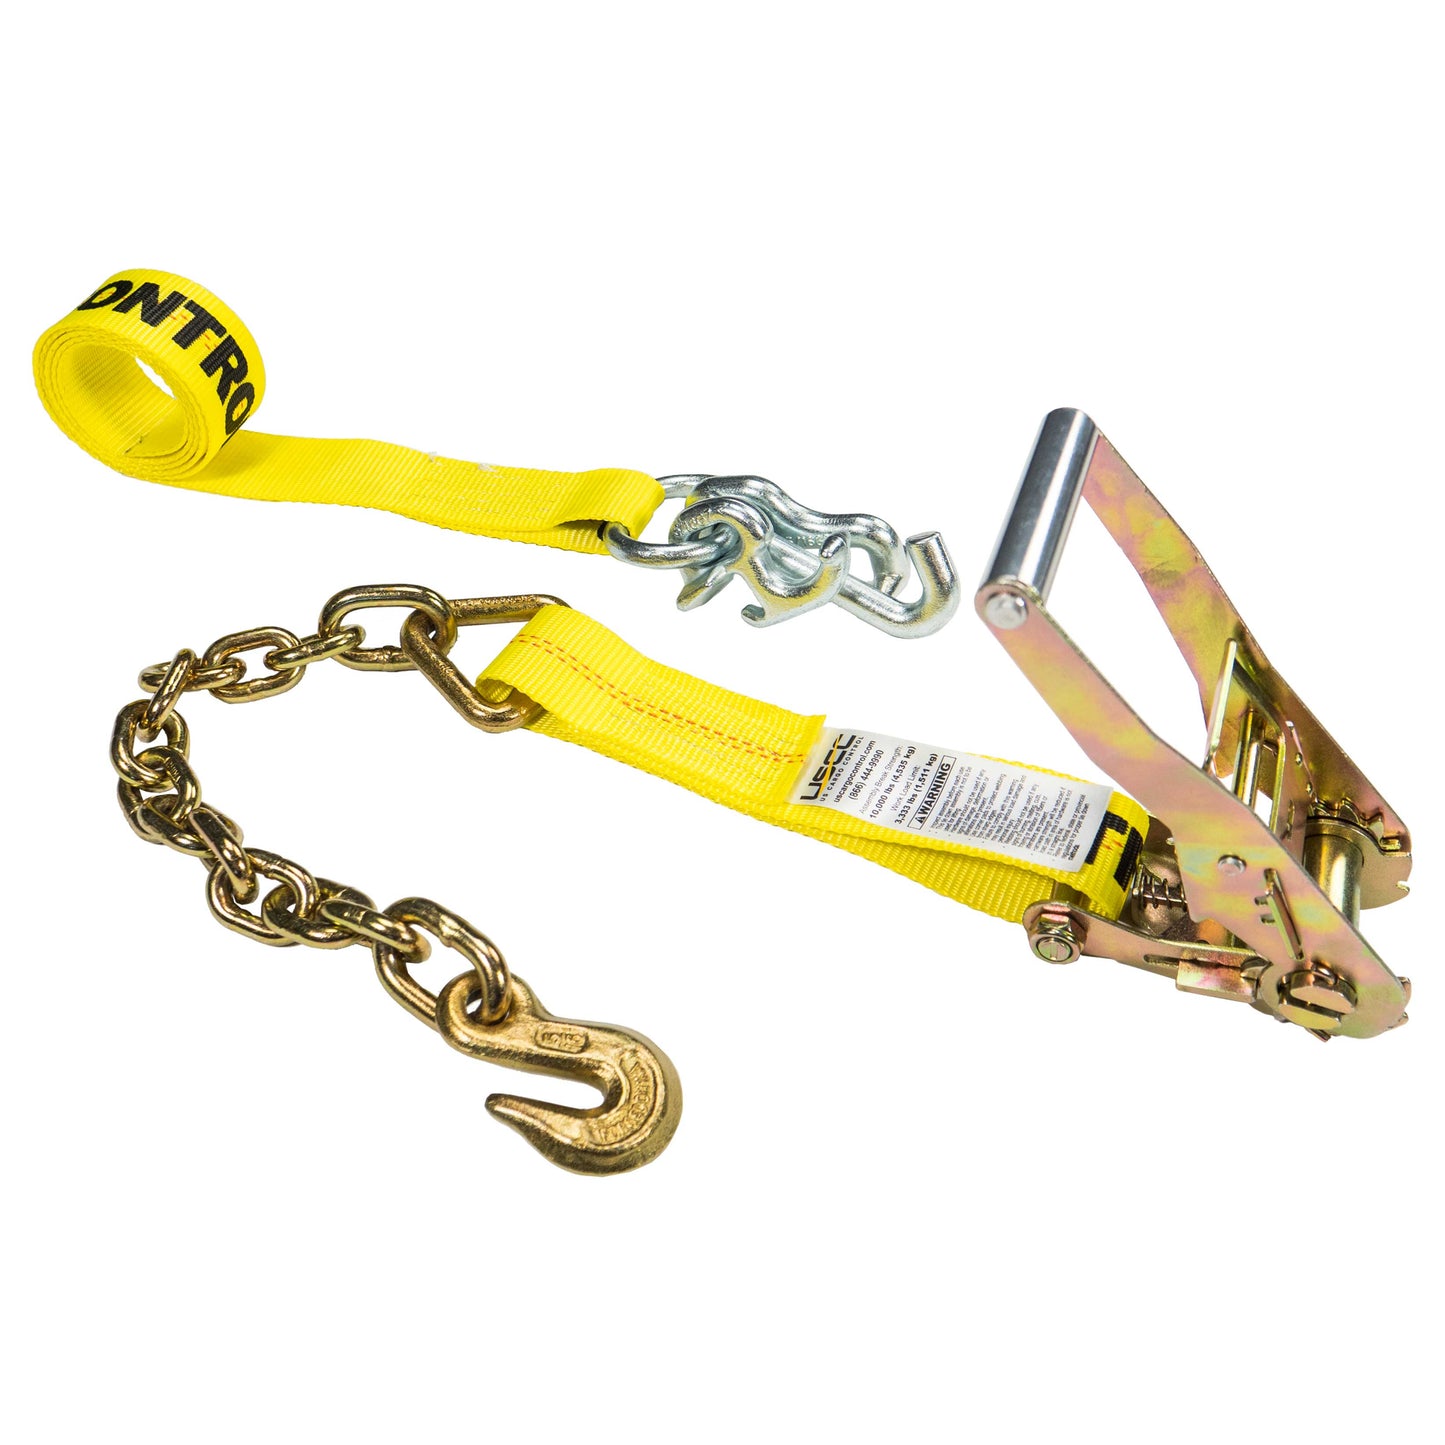 2" x 10' Ratchet Strap with Chain Extension and RTJ Cluster Hook